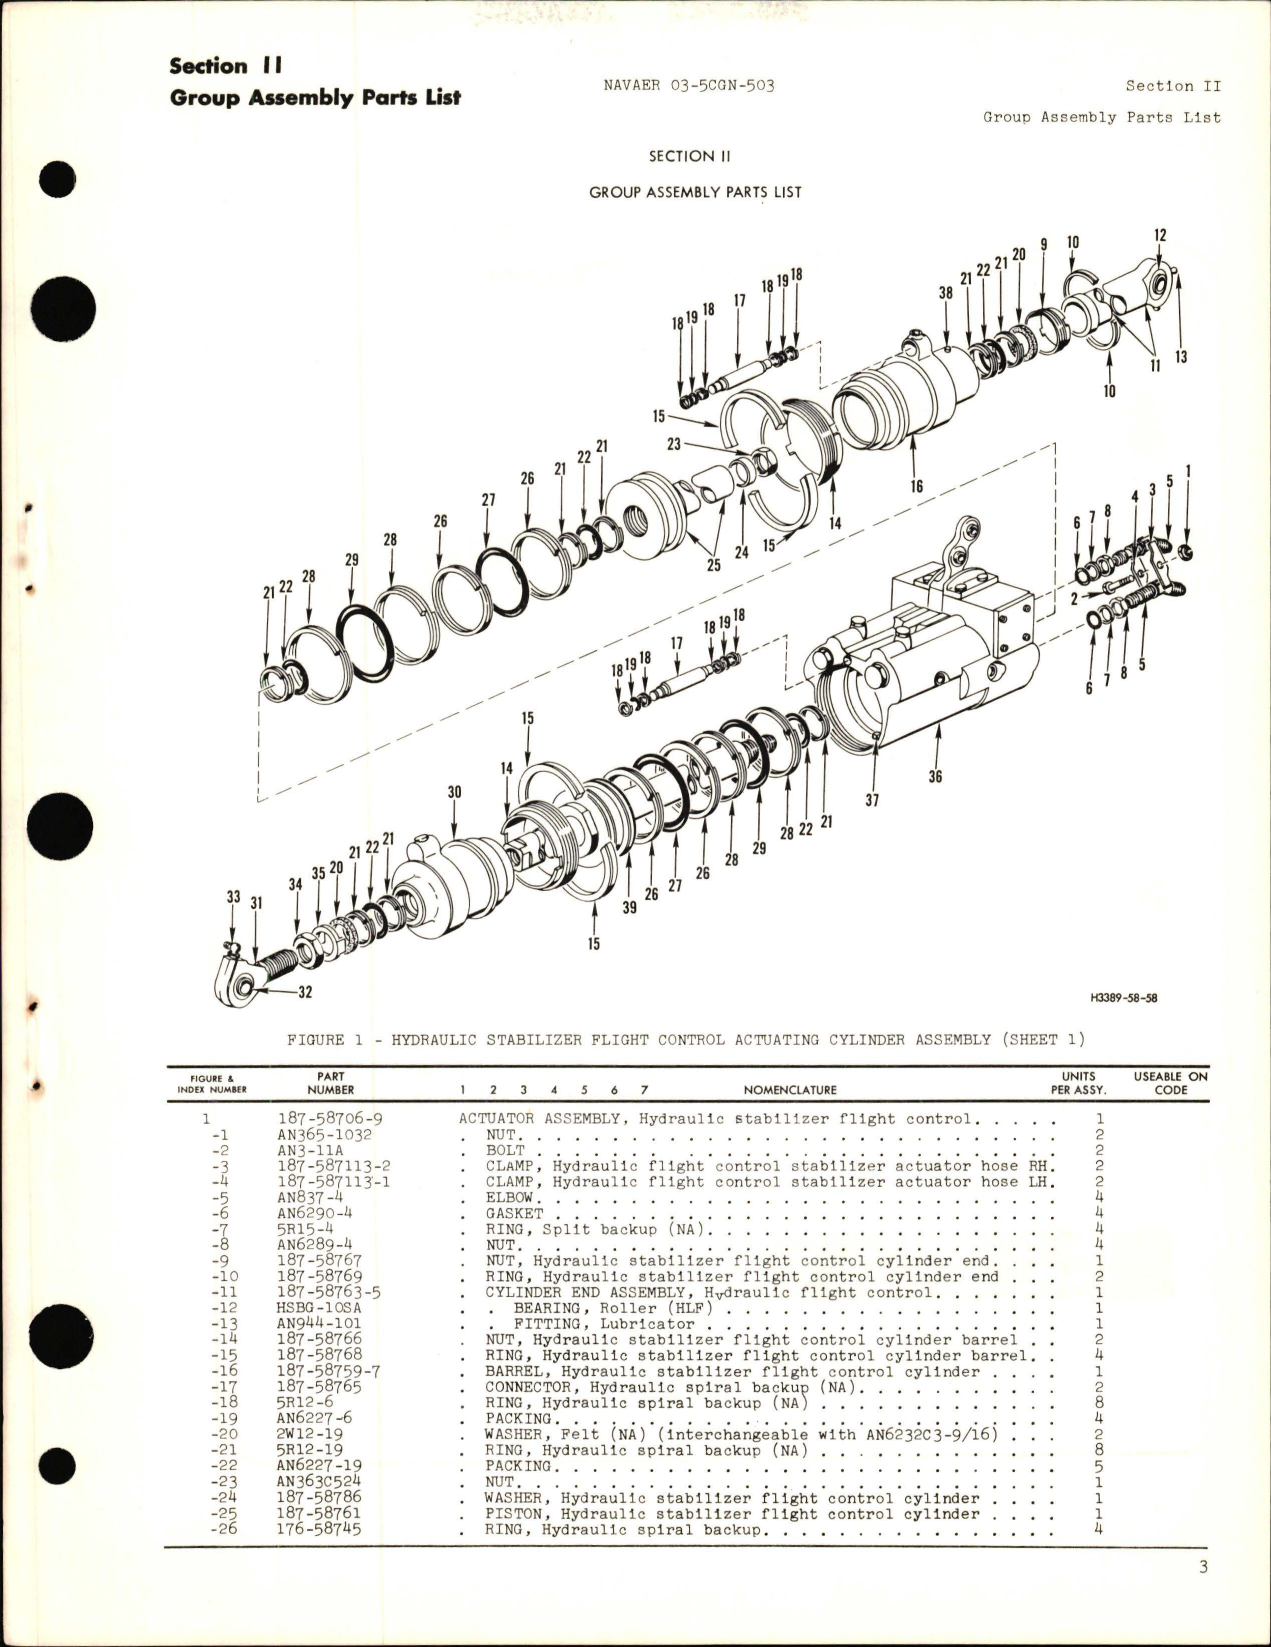 Sample page 5 from AirCorps Library document: Parts Breakdown for Hydraulic Stabilizer Flight Control Actuating Cylinder Assembly - Part 187-58706-9